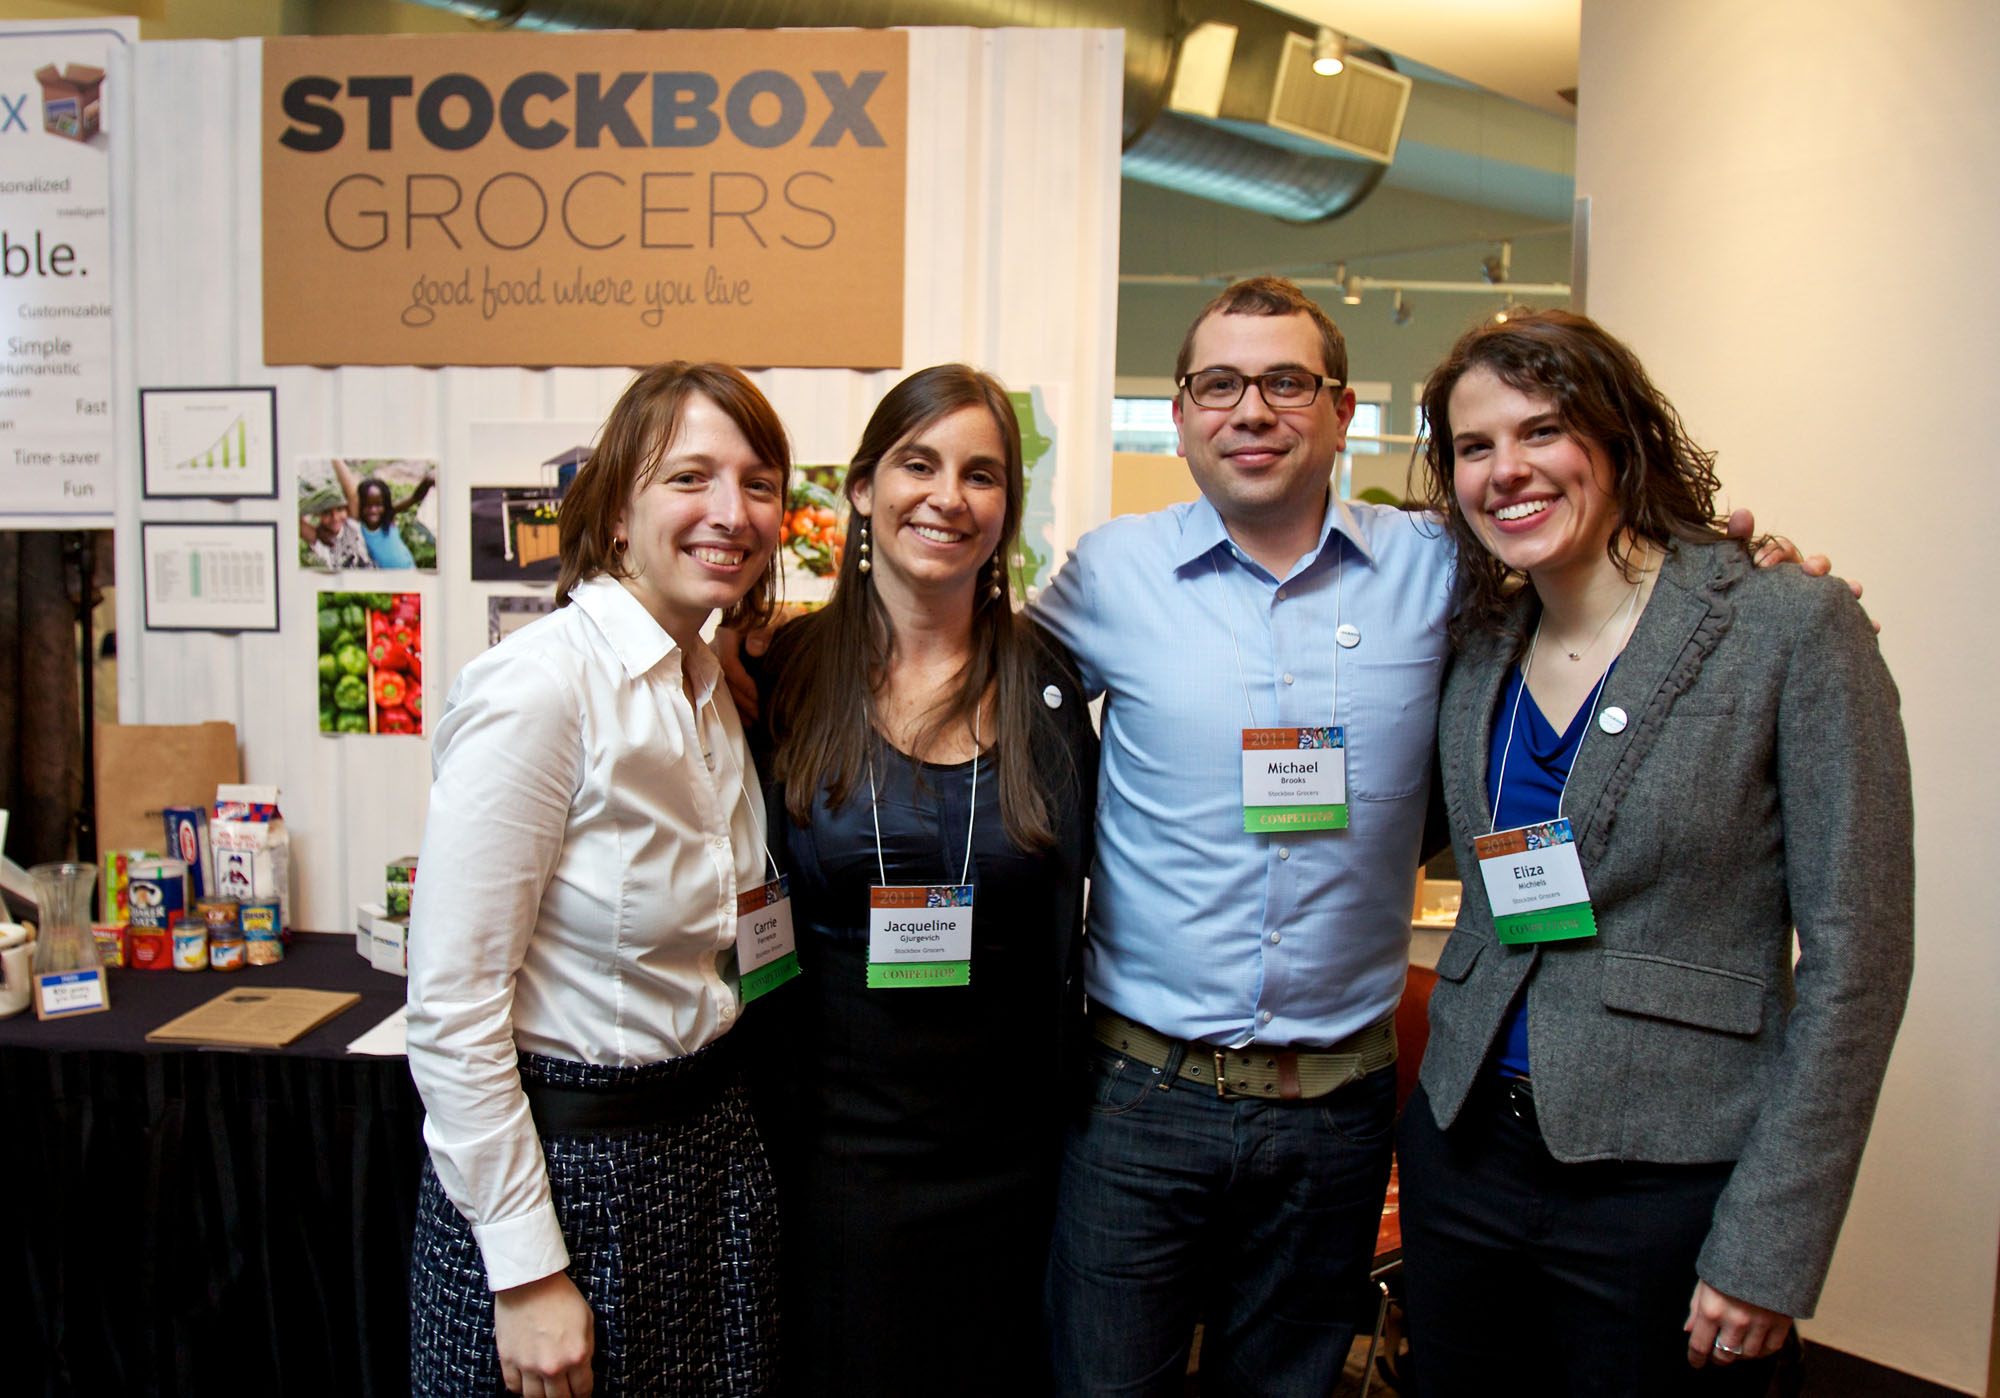 Stockbox Grocers wins 2nd place prize of $10,000 at 2011 UW Business Plan Competition